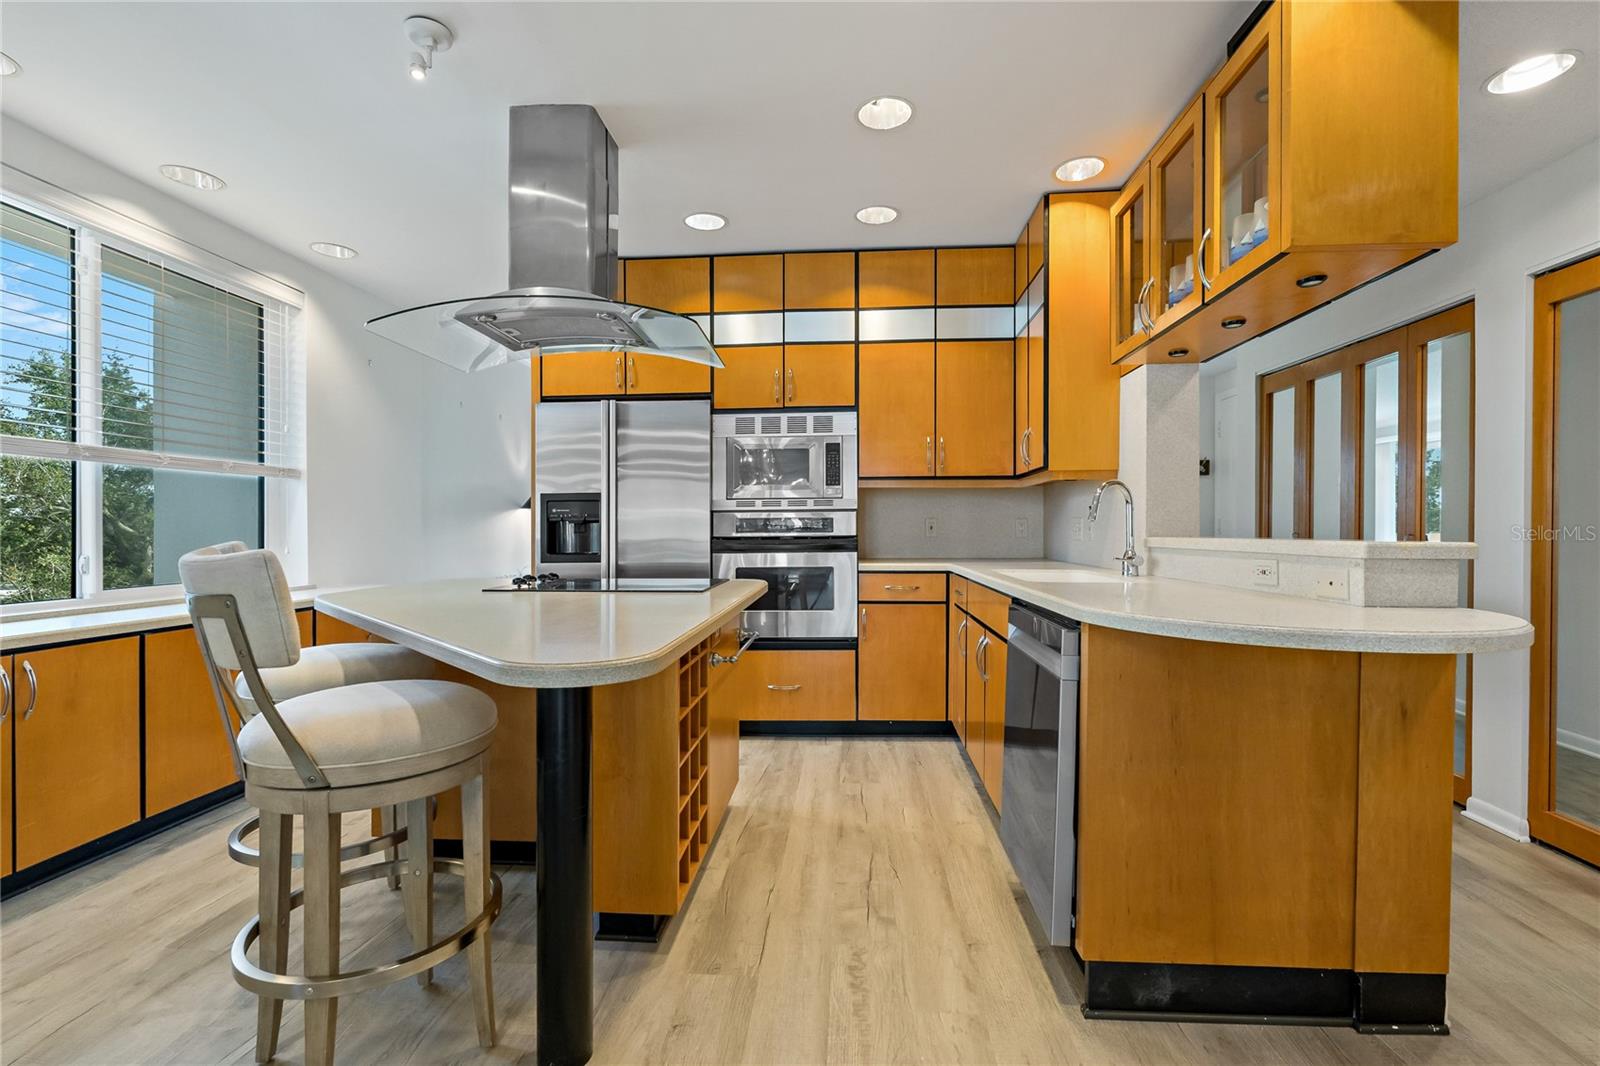 Gorgeous kitchen with stainless appliances with plenty of storage